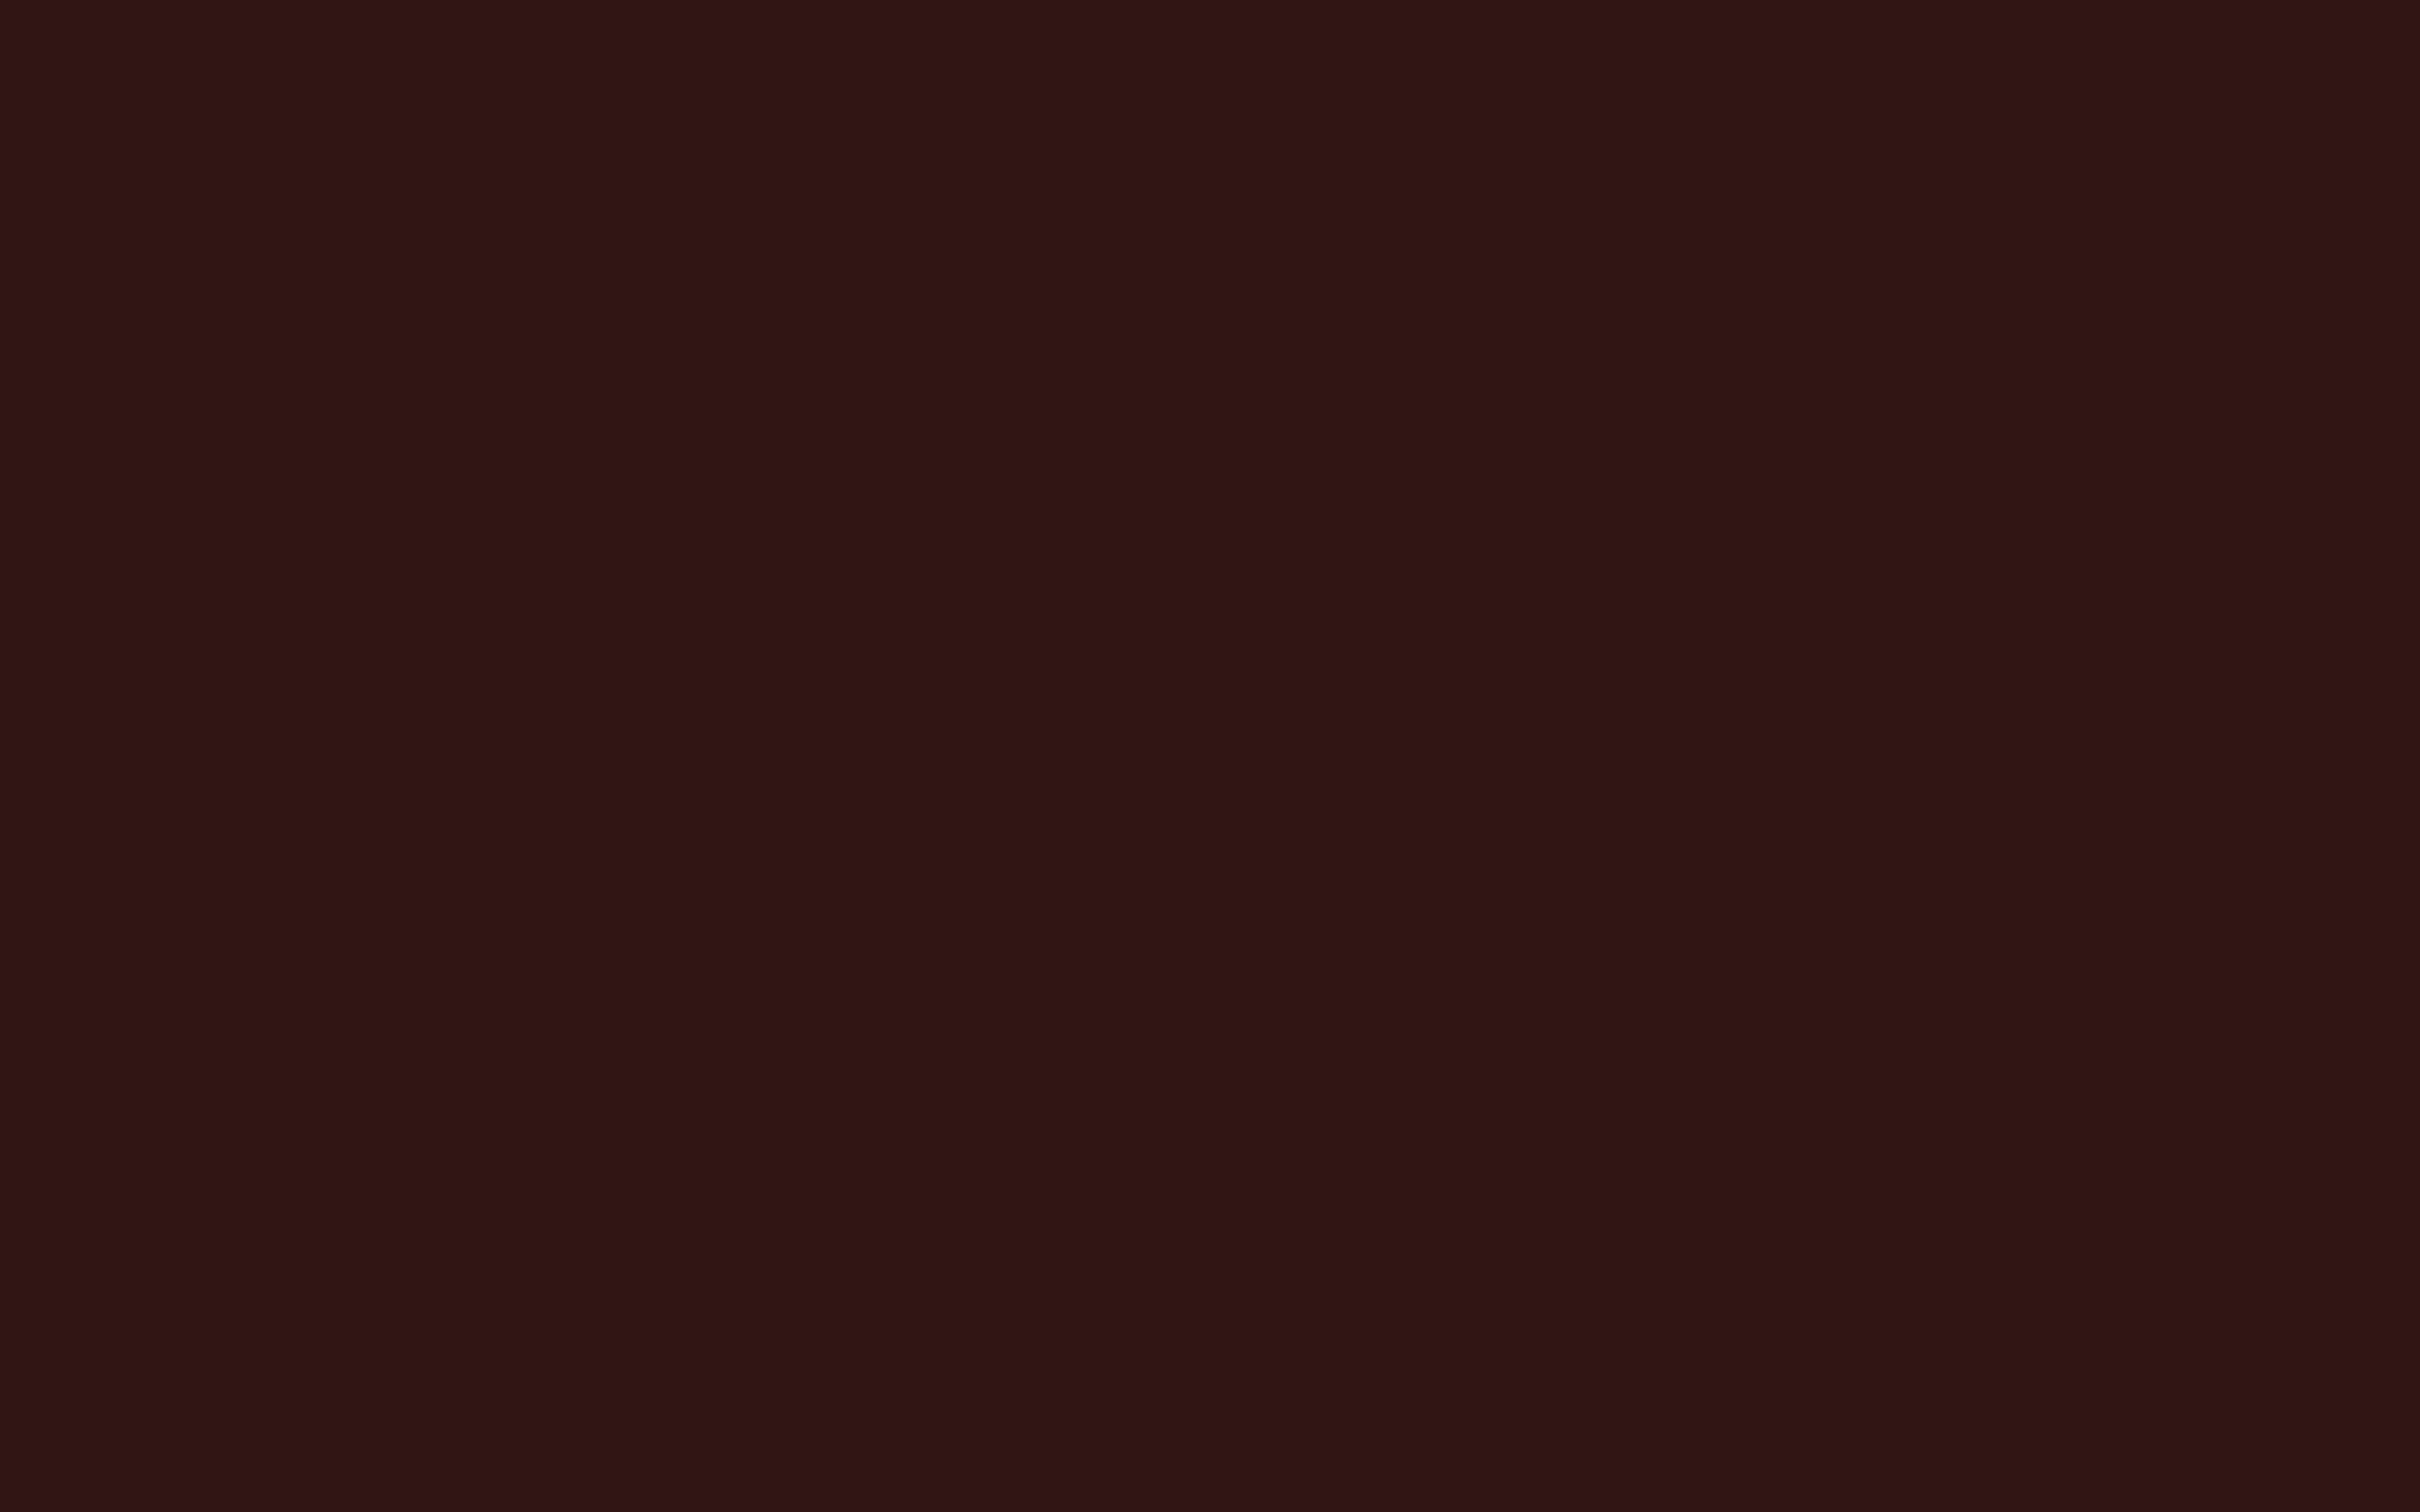 background color solid brown images 2880x1800 2880x1800